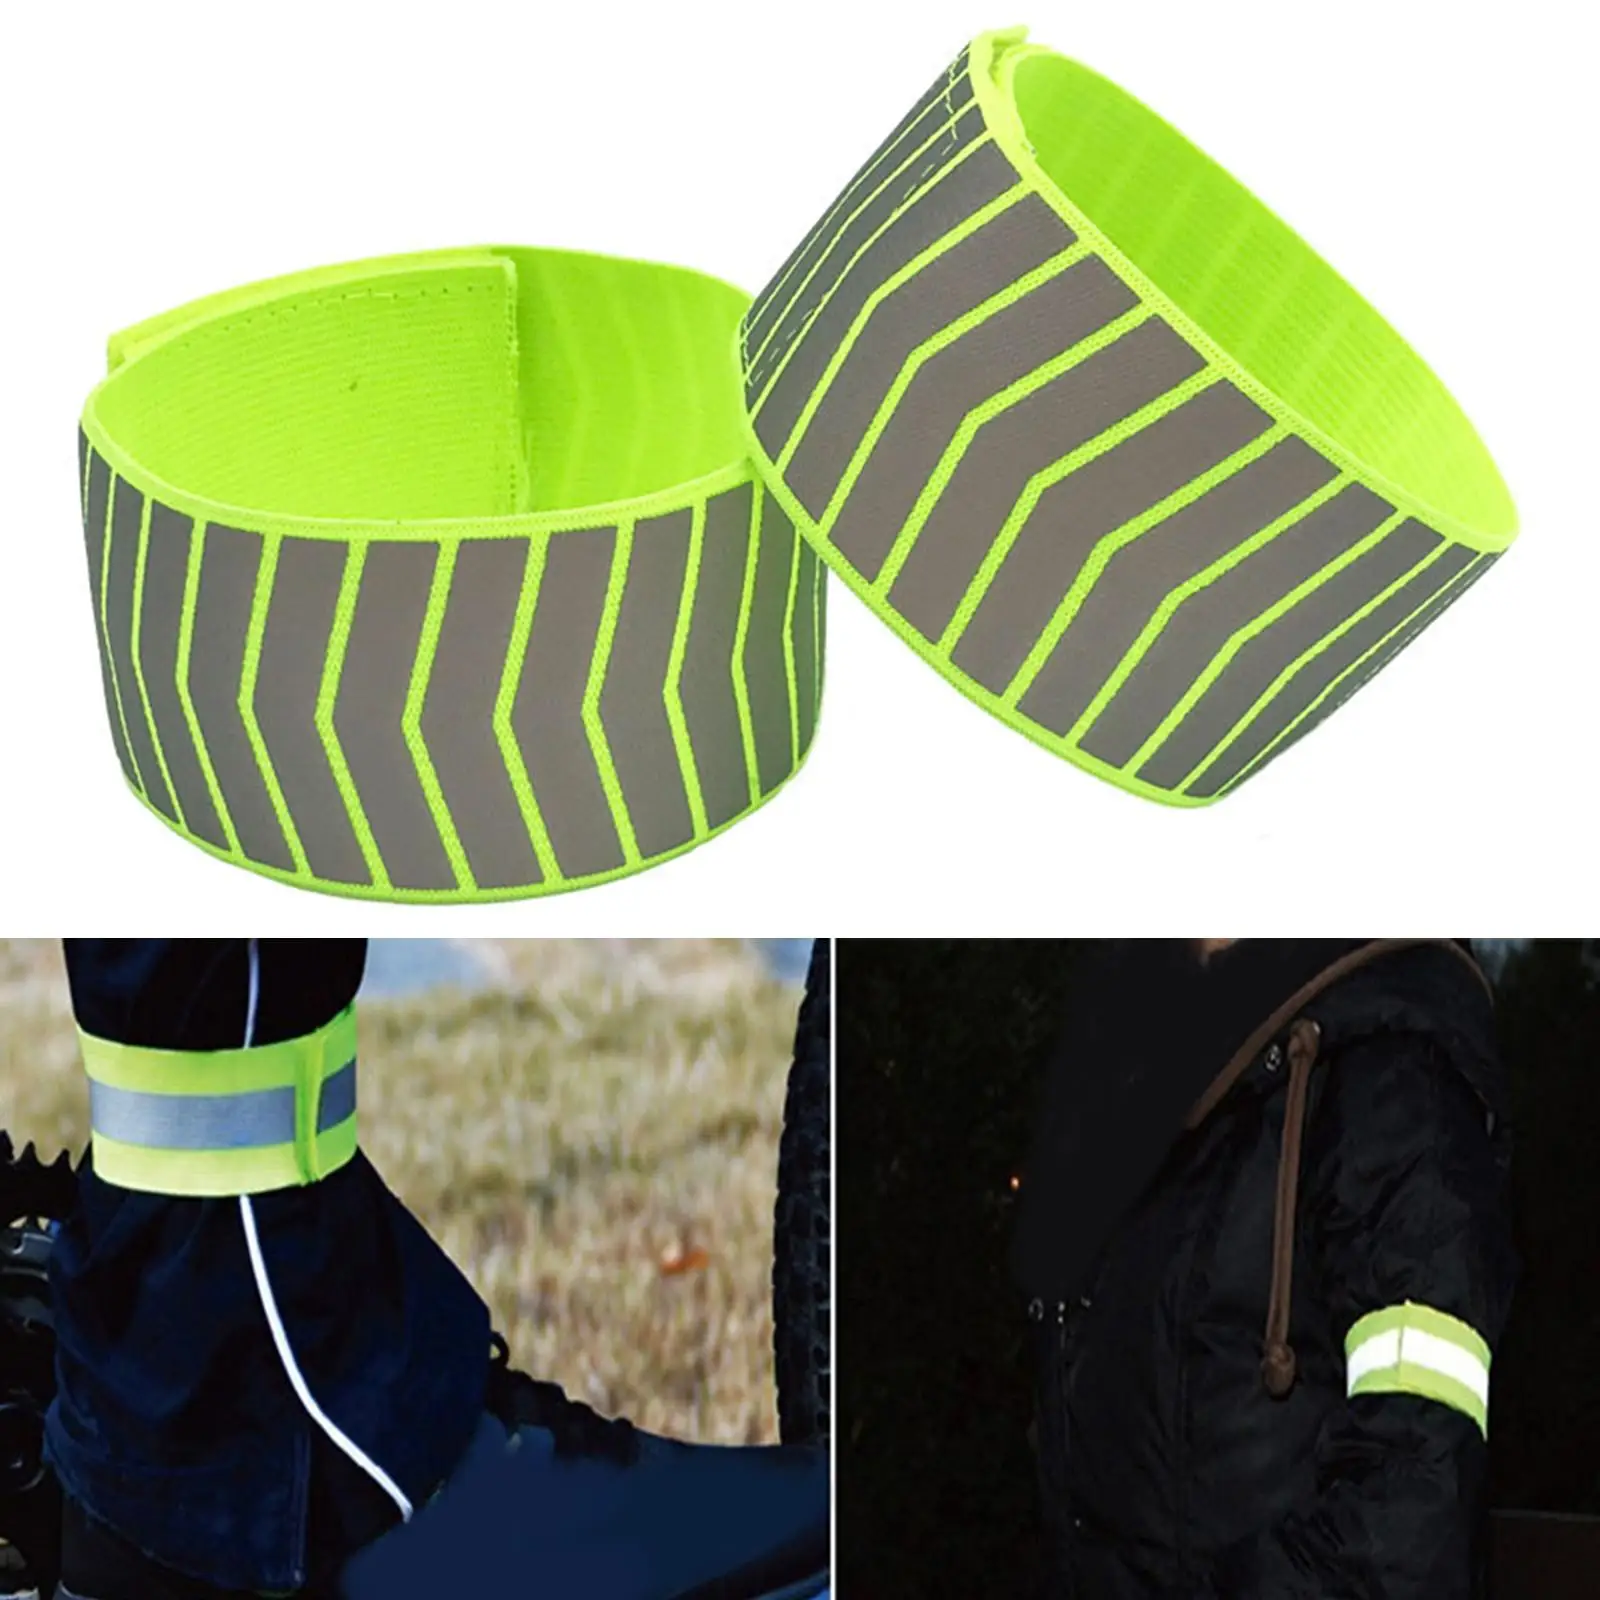 Reflective Safety Arm Band Light Up Cycling Jogging Running 